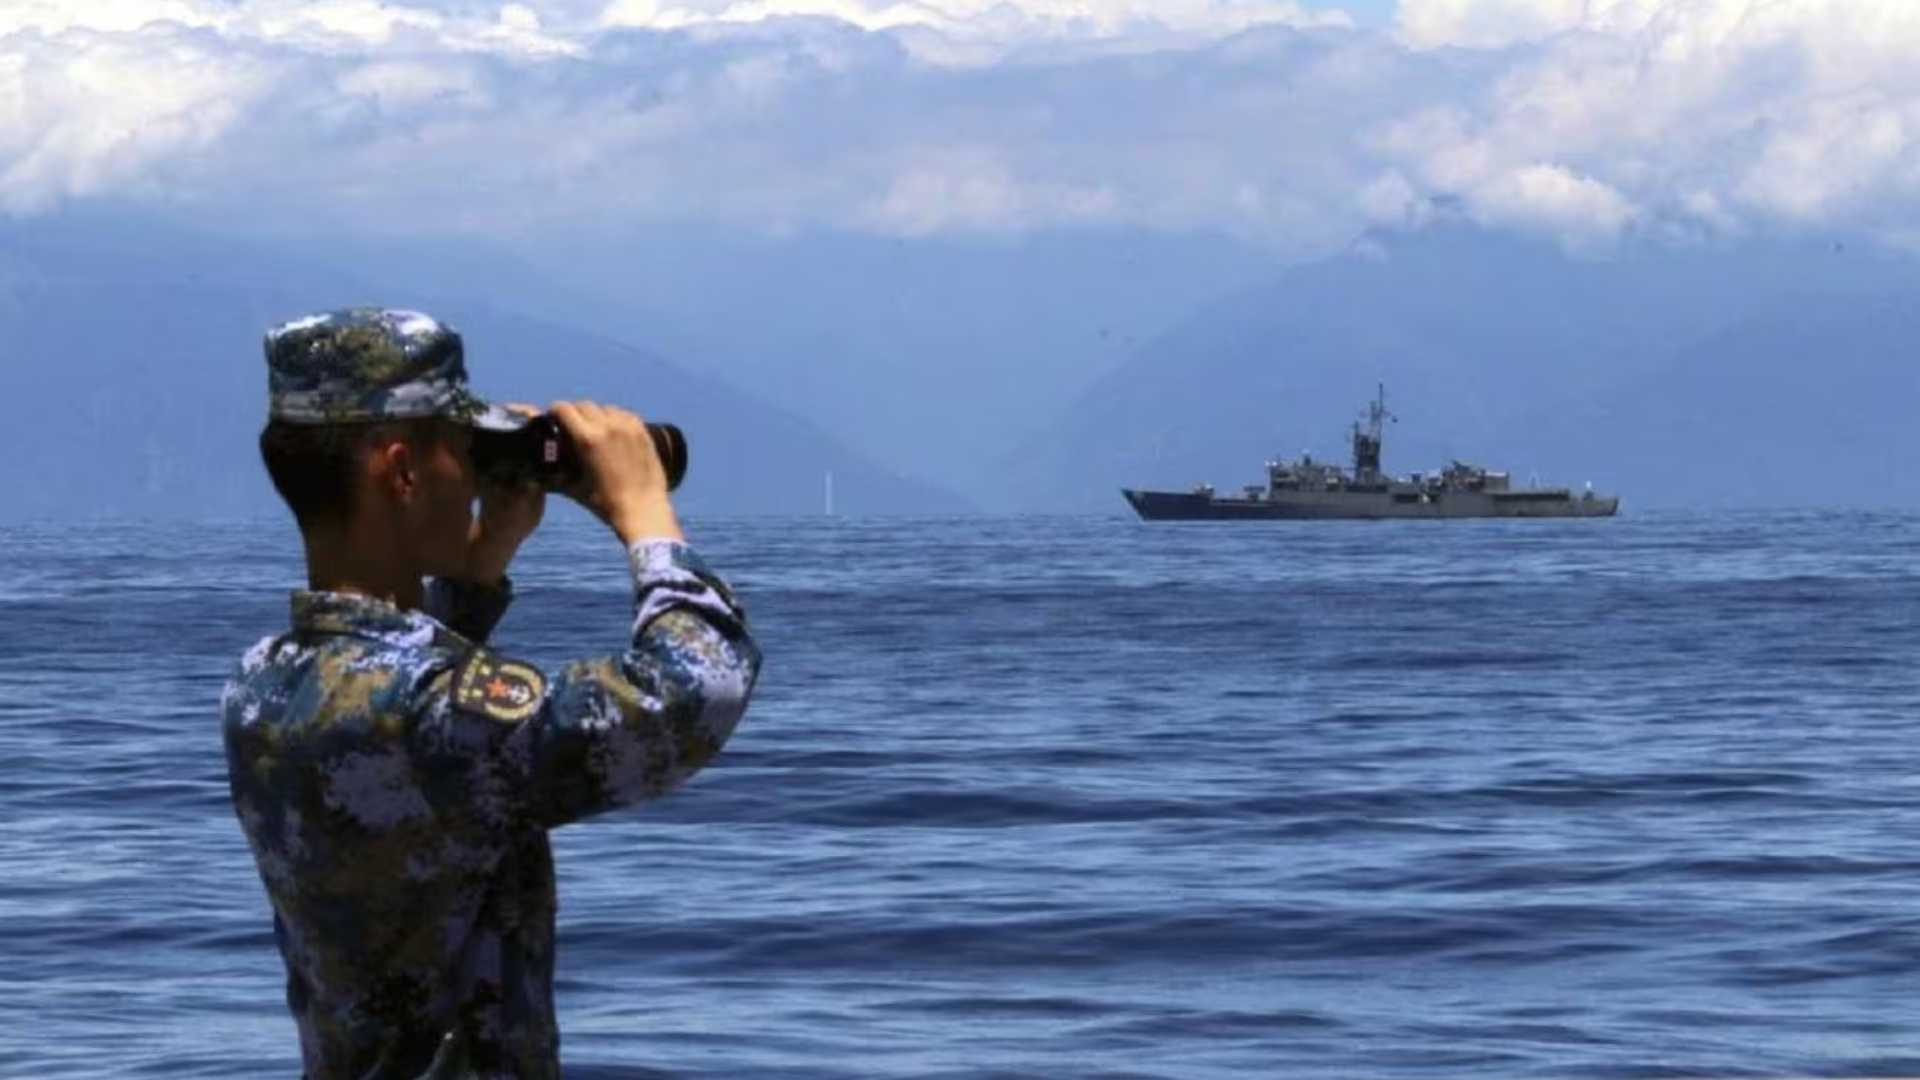 Taiwan Detects Record Number of Chinese Aircraft and Naval Vessels Near Its Territory